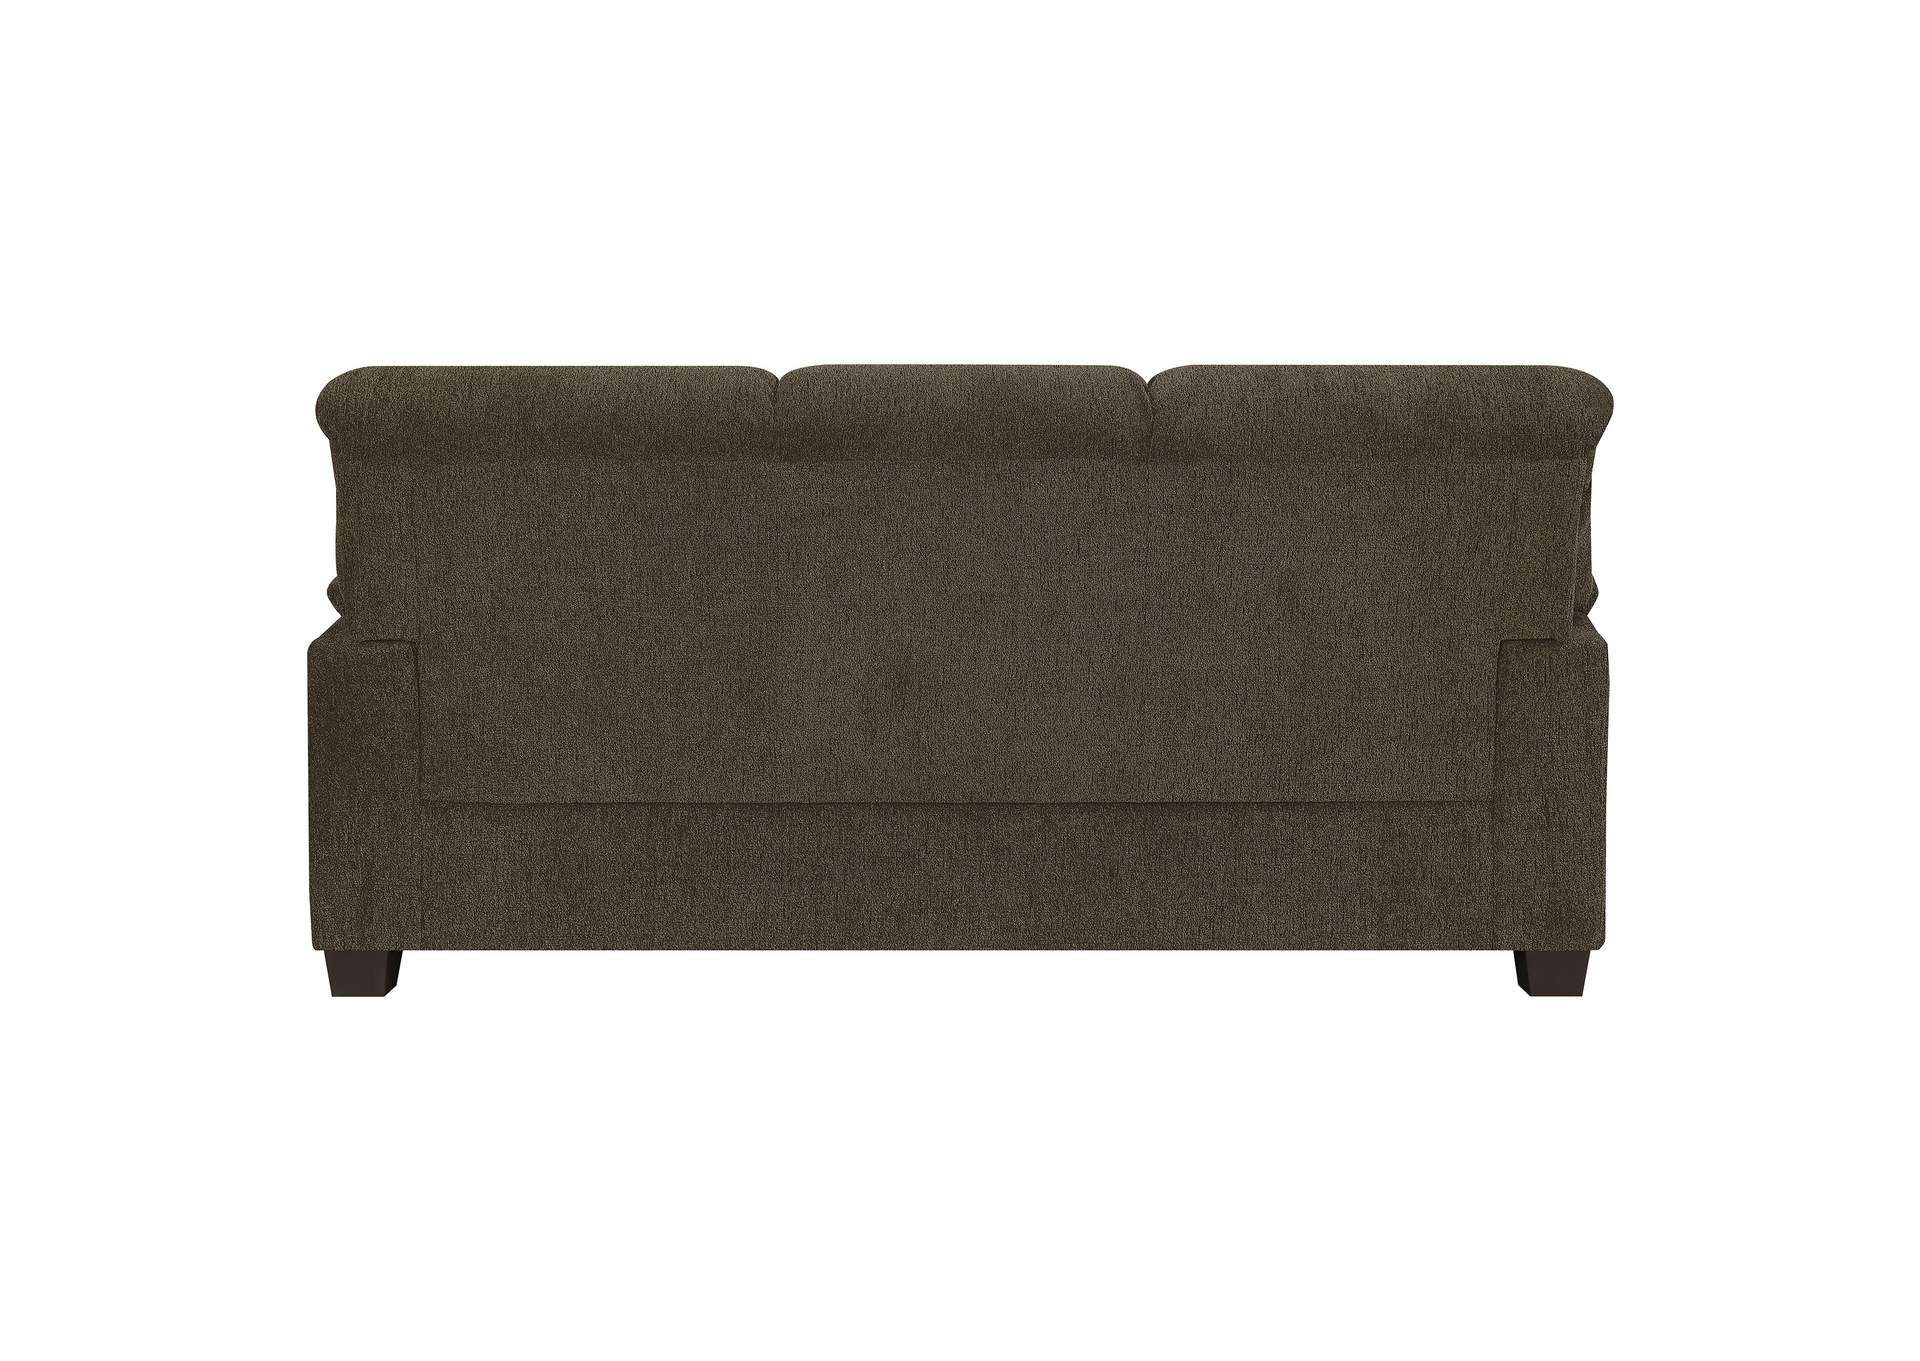 Clementine Upholstered Sofa with Nailhead Trim Brown,Coaster Furniture